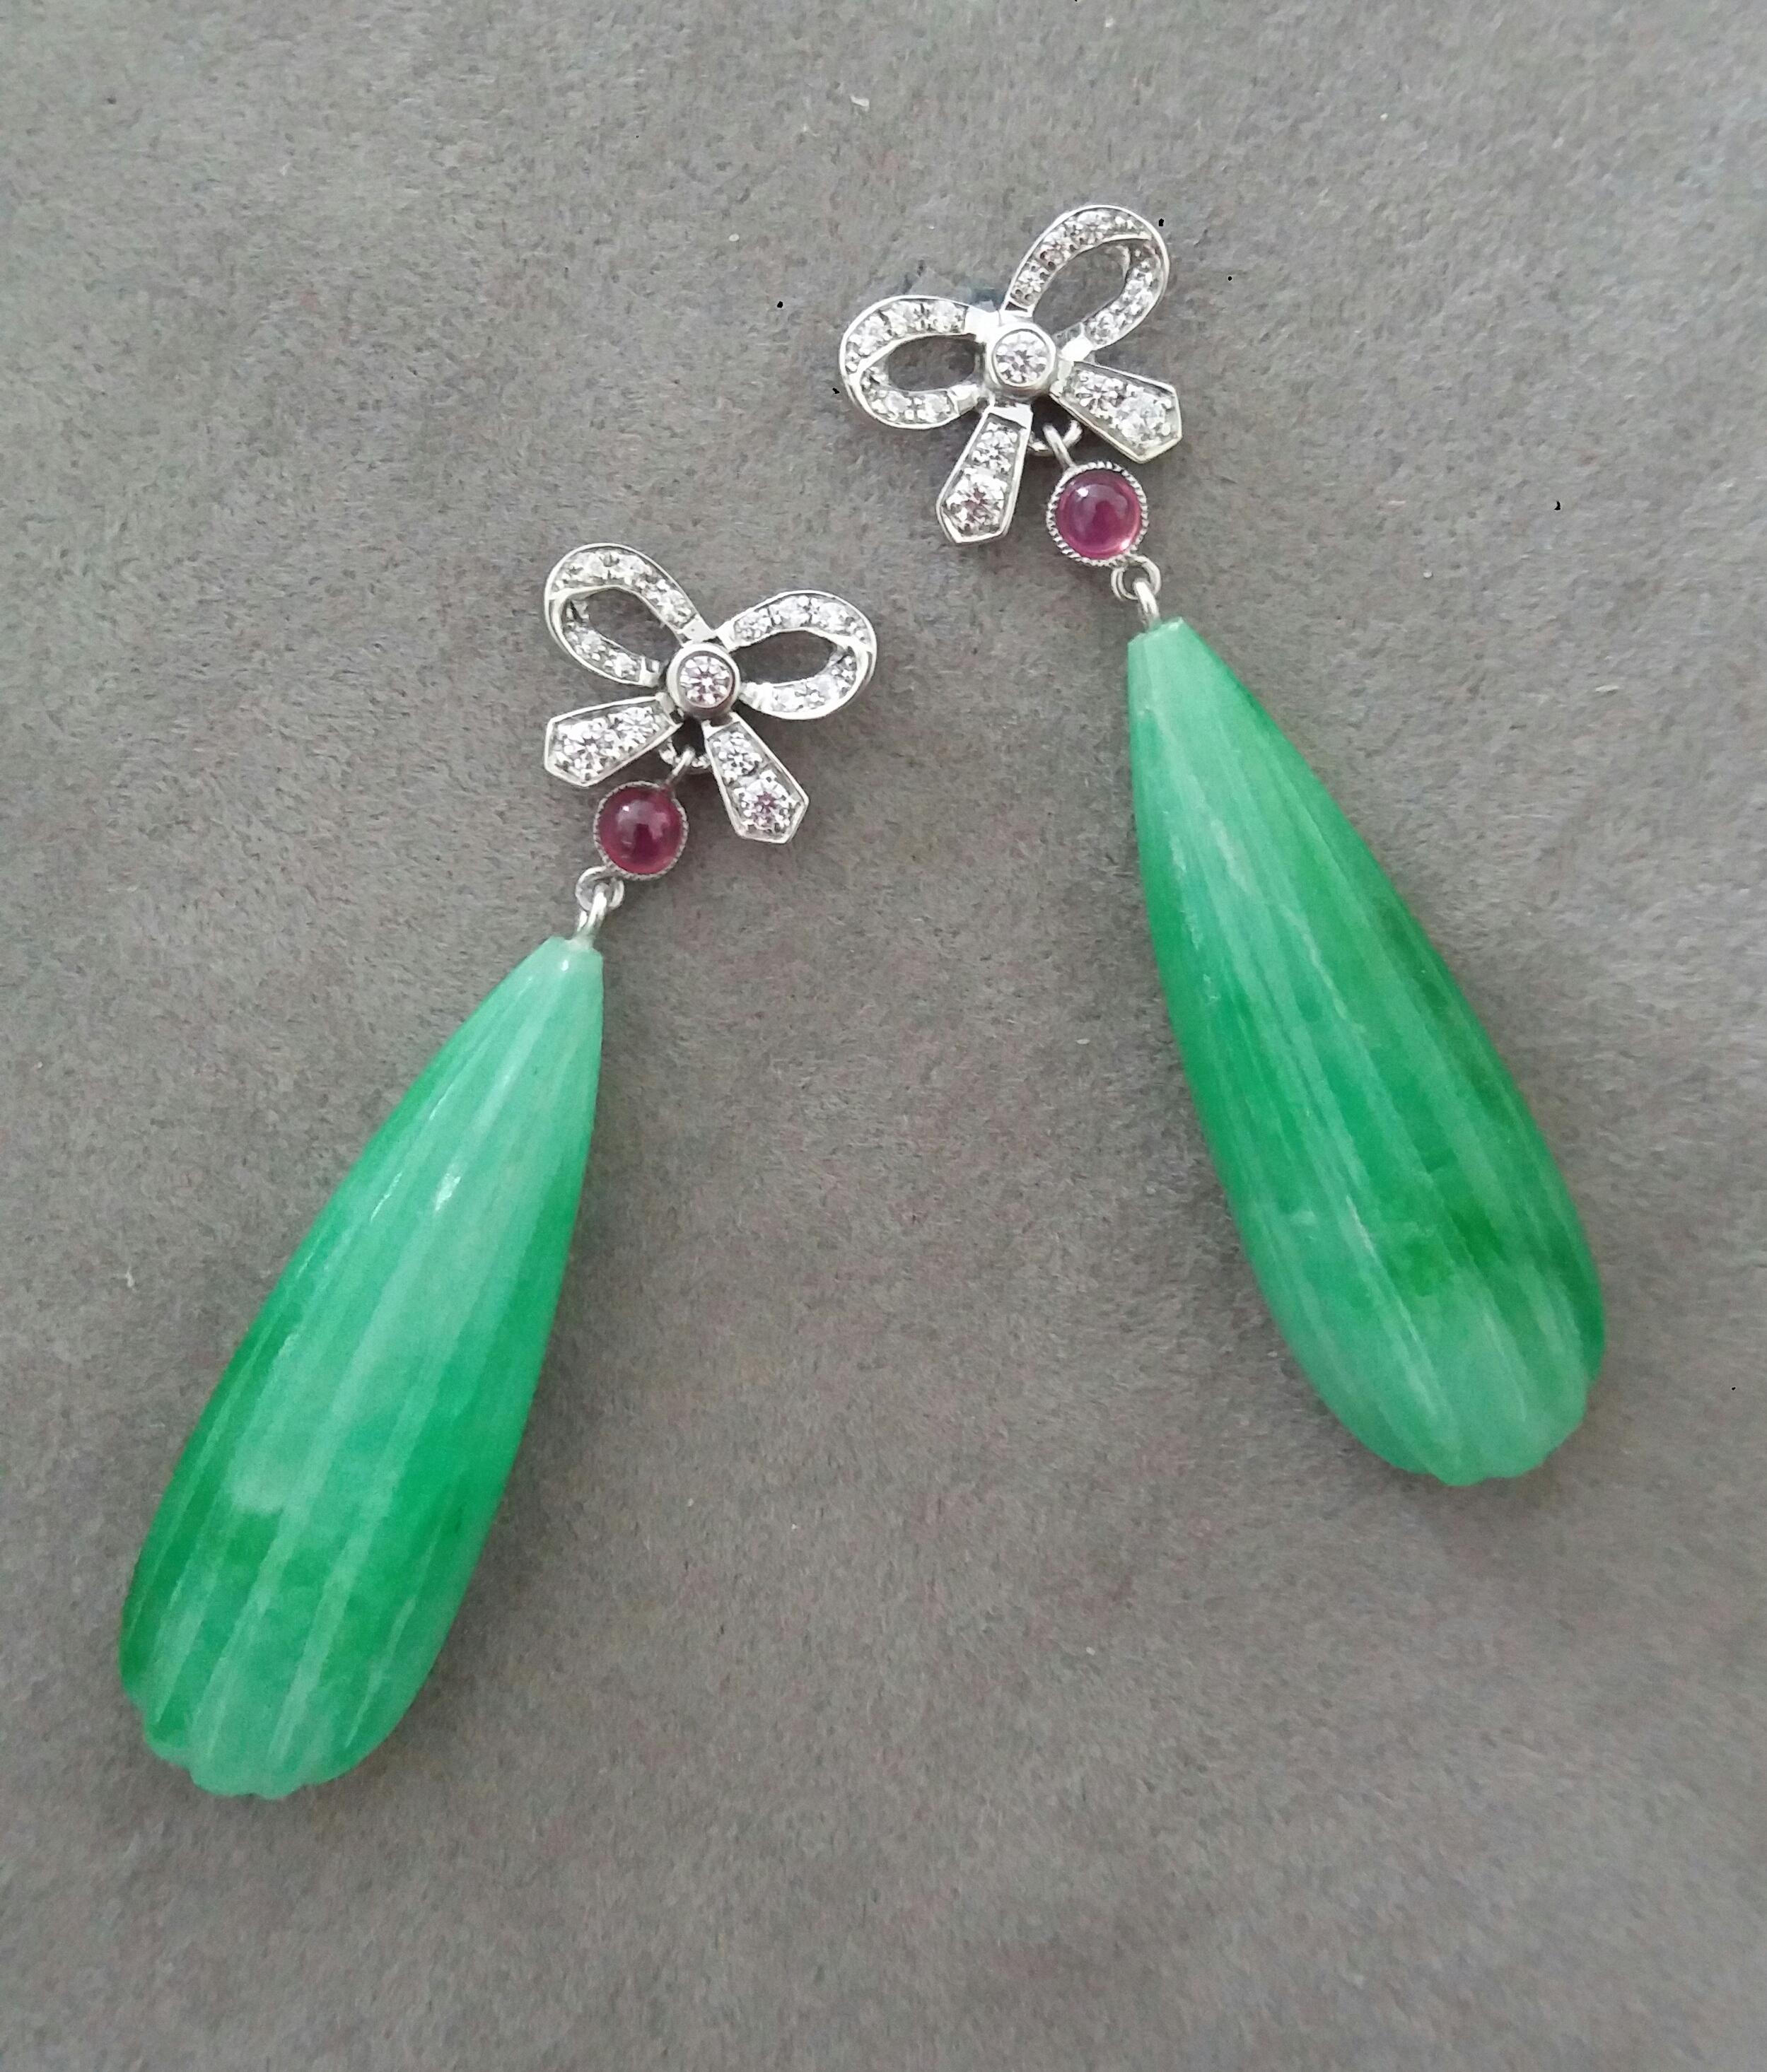 Mixed Cut Art Deco Style 14k Gold And Diamonds Bows Rubies Carved Jade Dangle Earrings For Sale